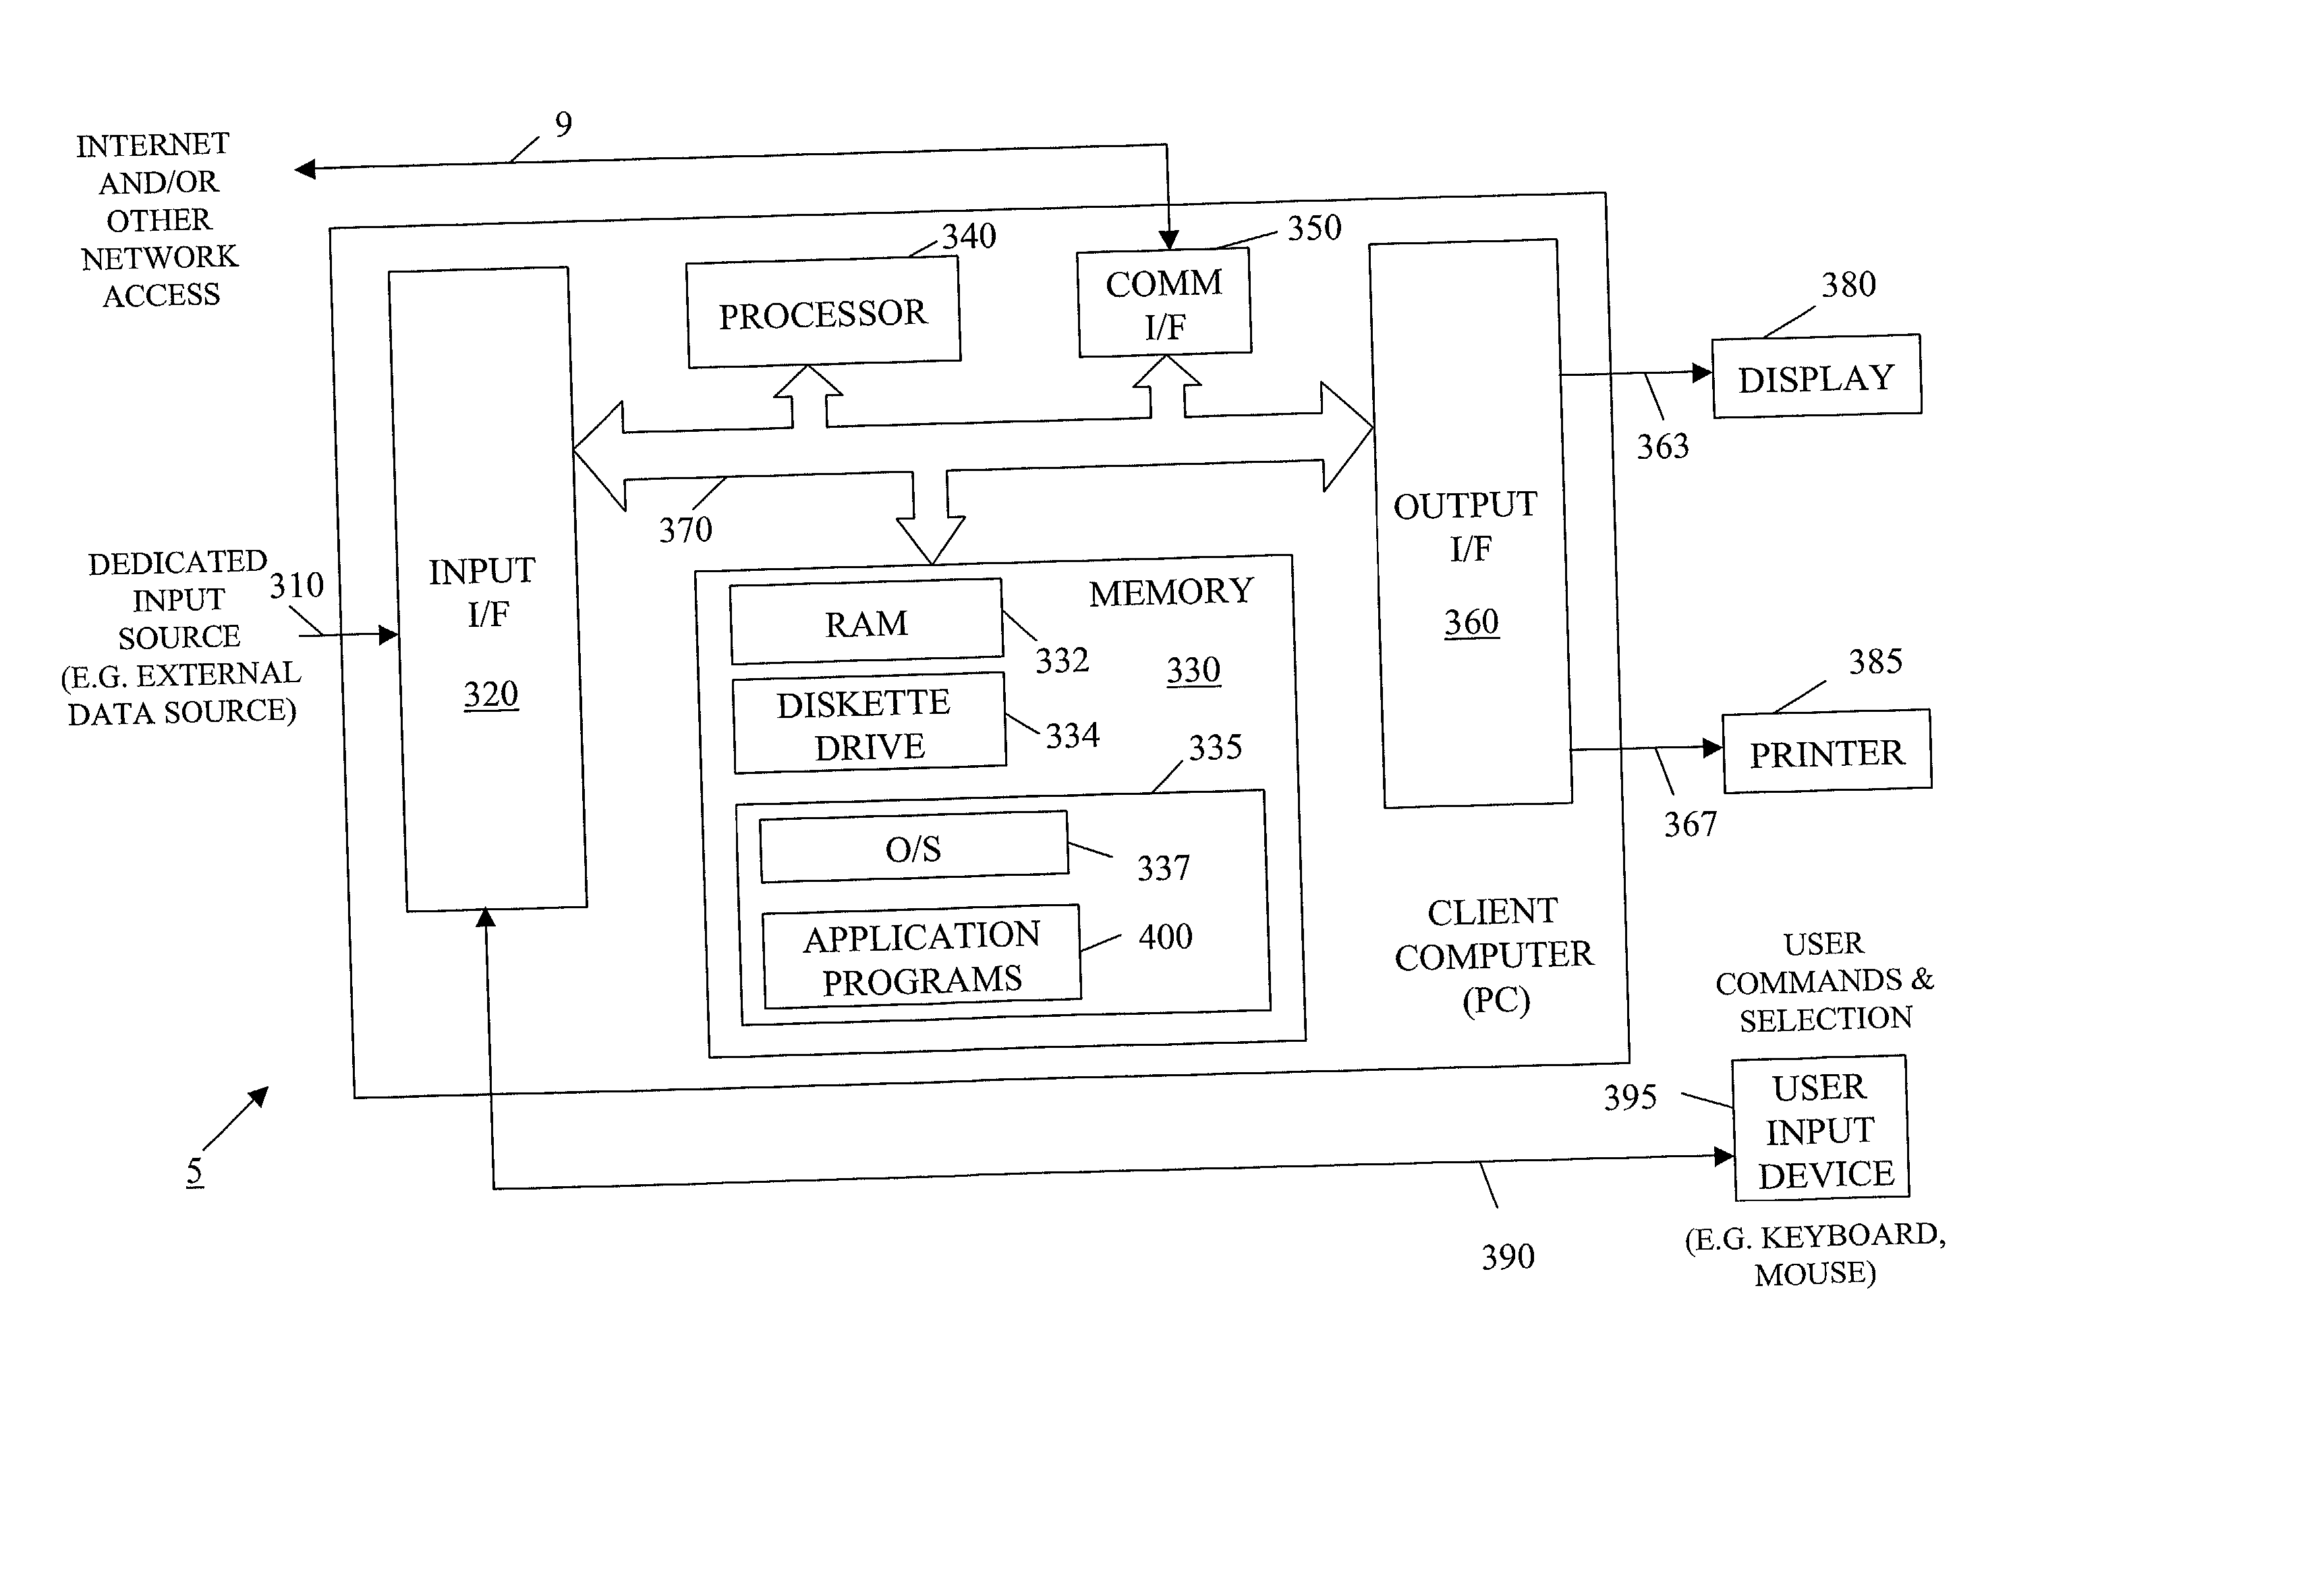 Apparatus and accompanying methods for network distribution and interstitial rendering of information objects to client computers